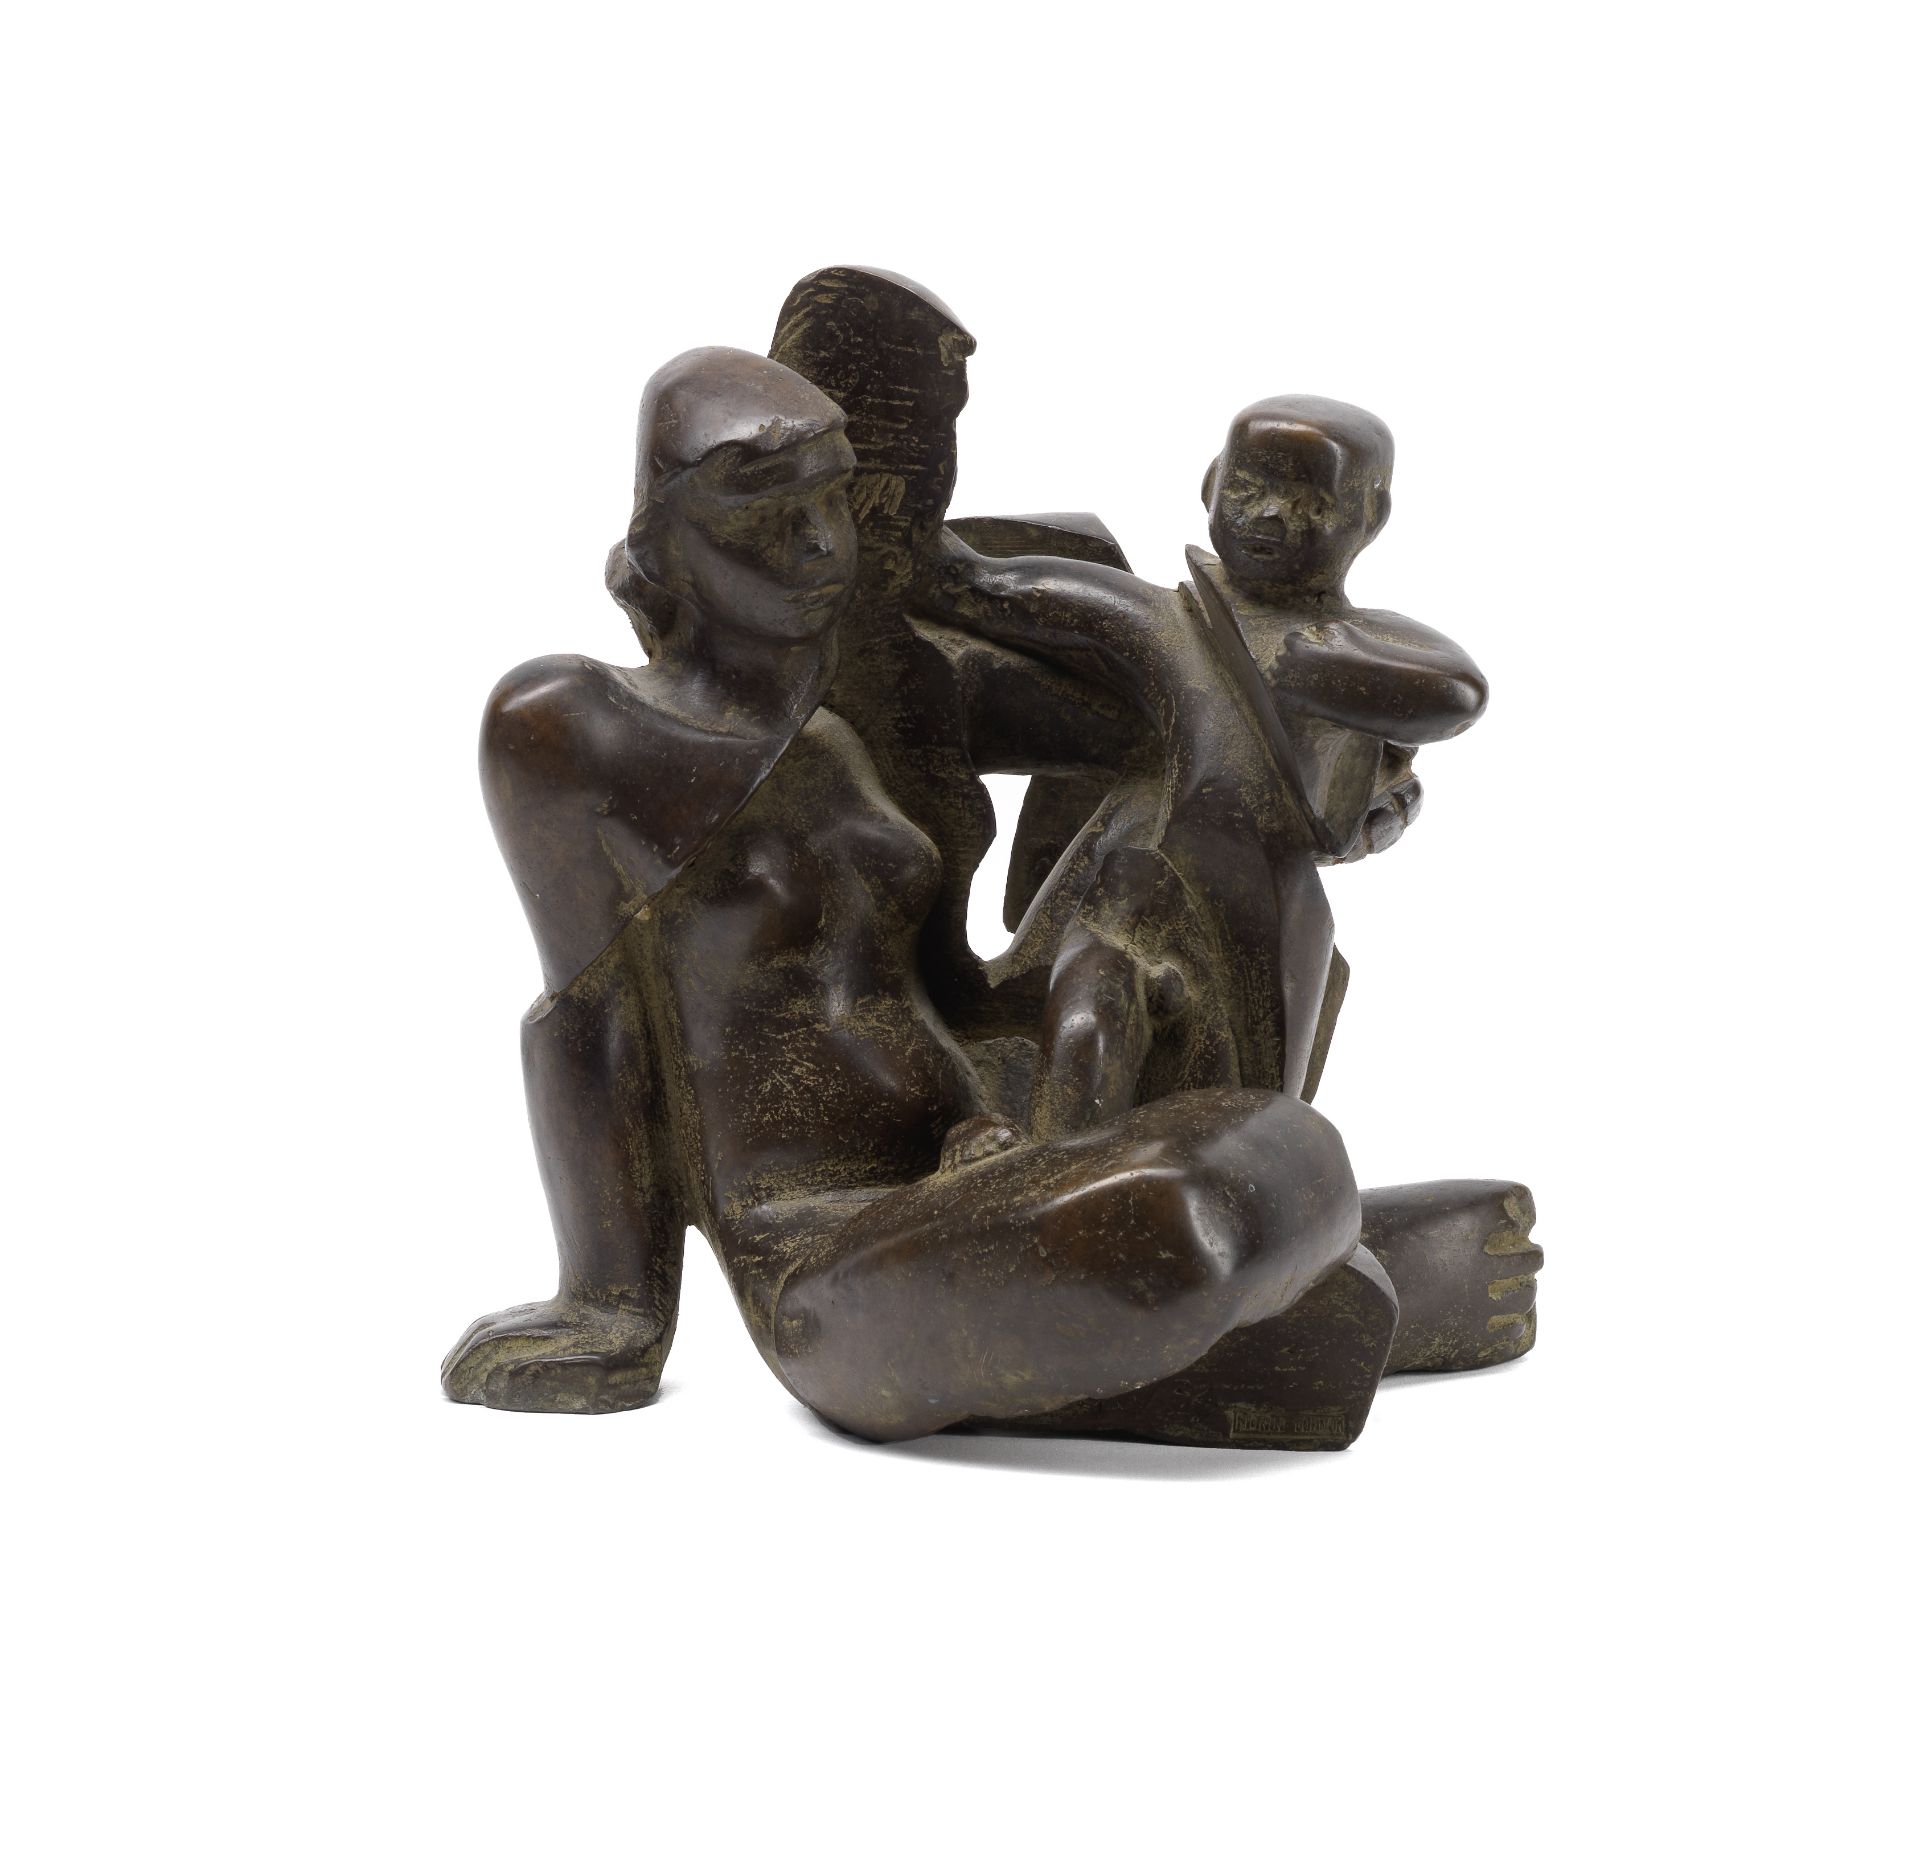 Glynn Williams (British, born 1939) Mother and Child 24.5cm (9 5/8in) high (Conceived in 1991)